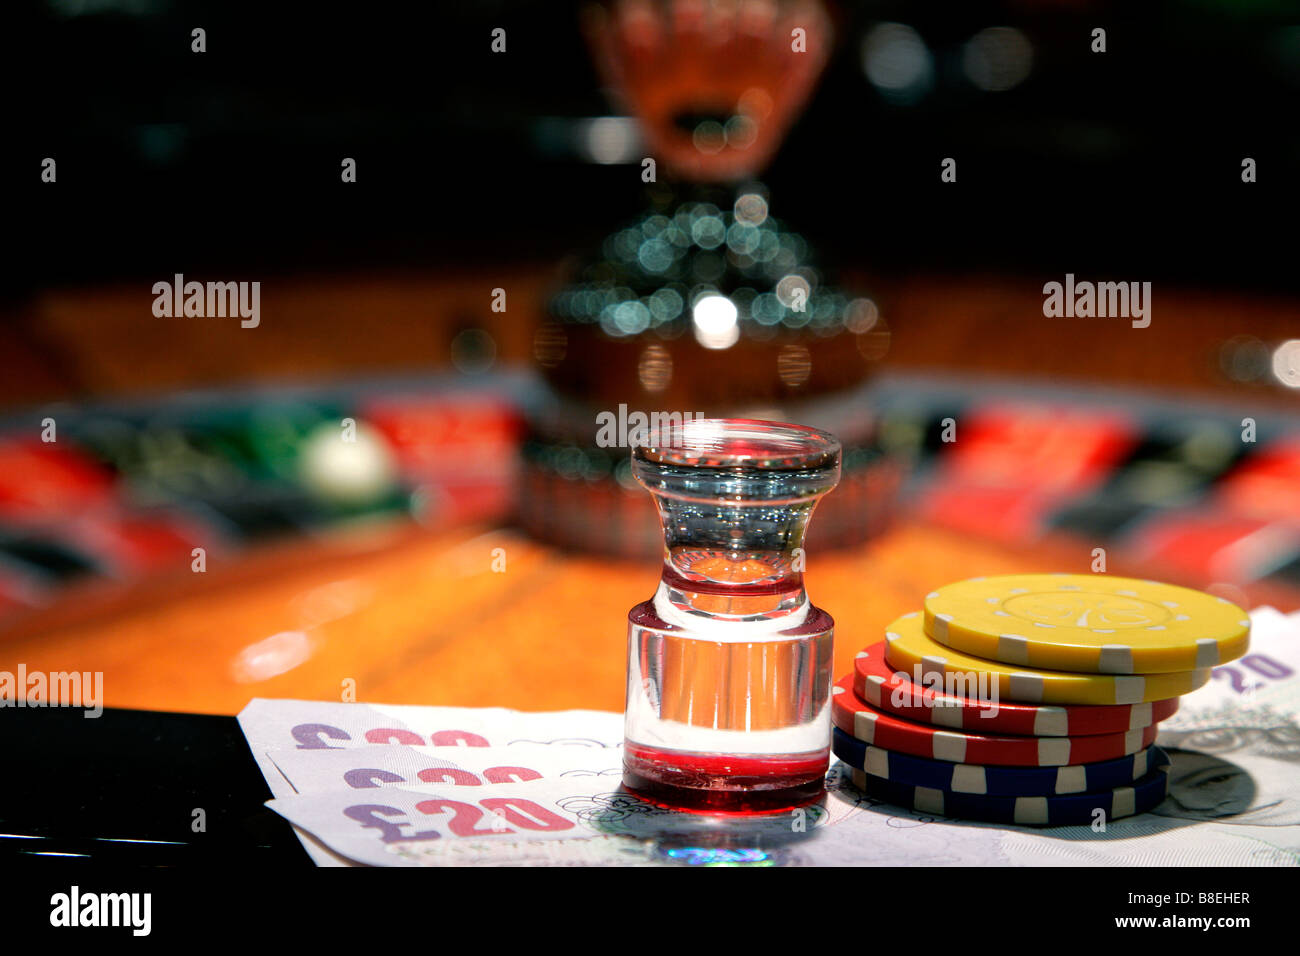 casino roulette gambling dolly chip money close up detail Stock Photo